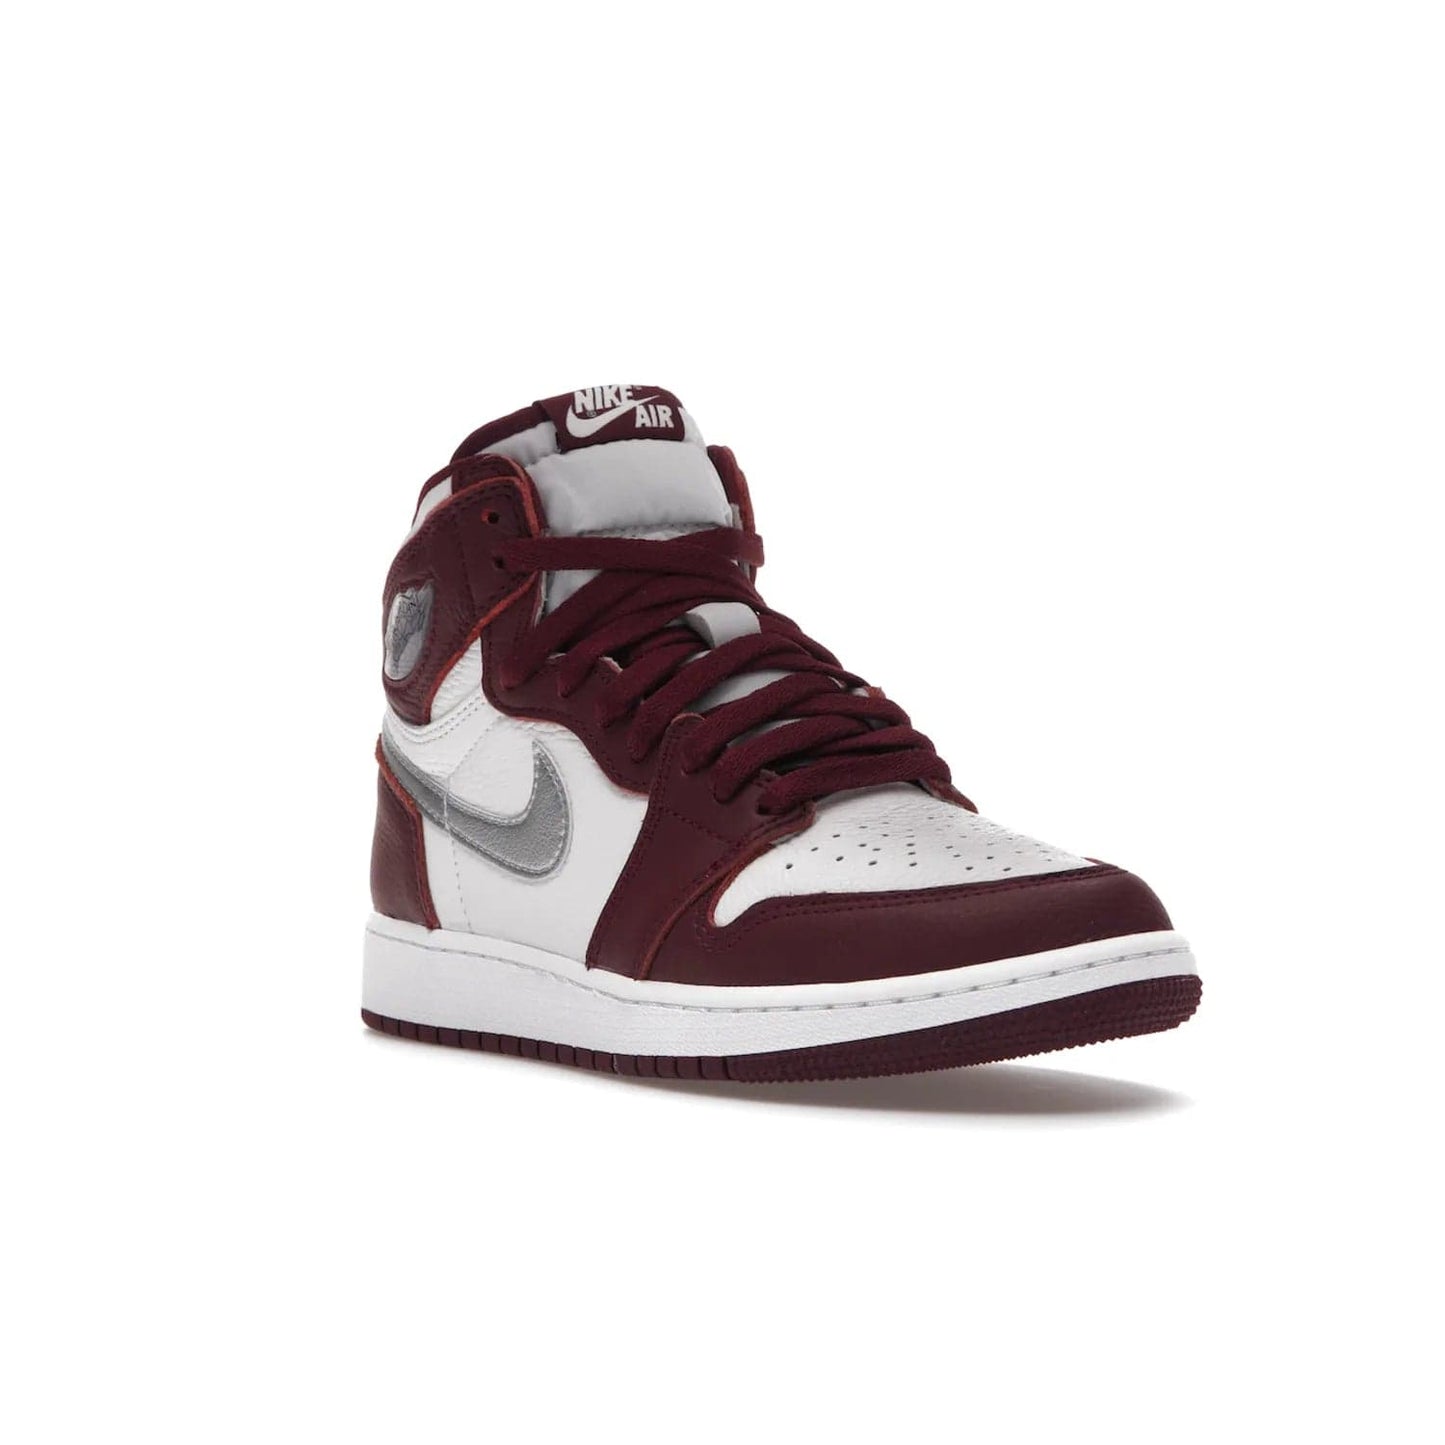 Jordan 1 Retro High OG Bordeaux (GS) - Image 6 - Only at www.BallersClubKickz.com - #
Introducing the Air Jordan 1 Retro High OG Bordeaux GS – a signature colorway part of the Jordan Brand Fall 2021 lineup. White leather upper & Bordeaux overlays, metallic silver swoosh, jeweled Air Jordan Wings logo & more. Step up your style game with this sleek fall season silhouette.